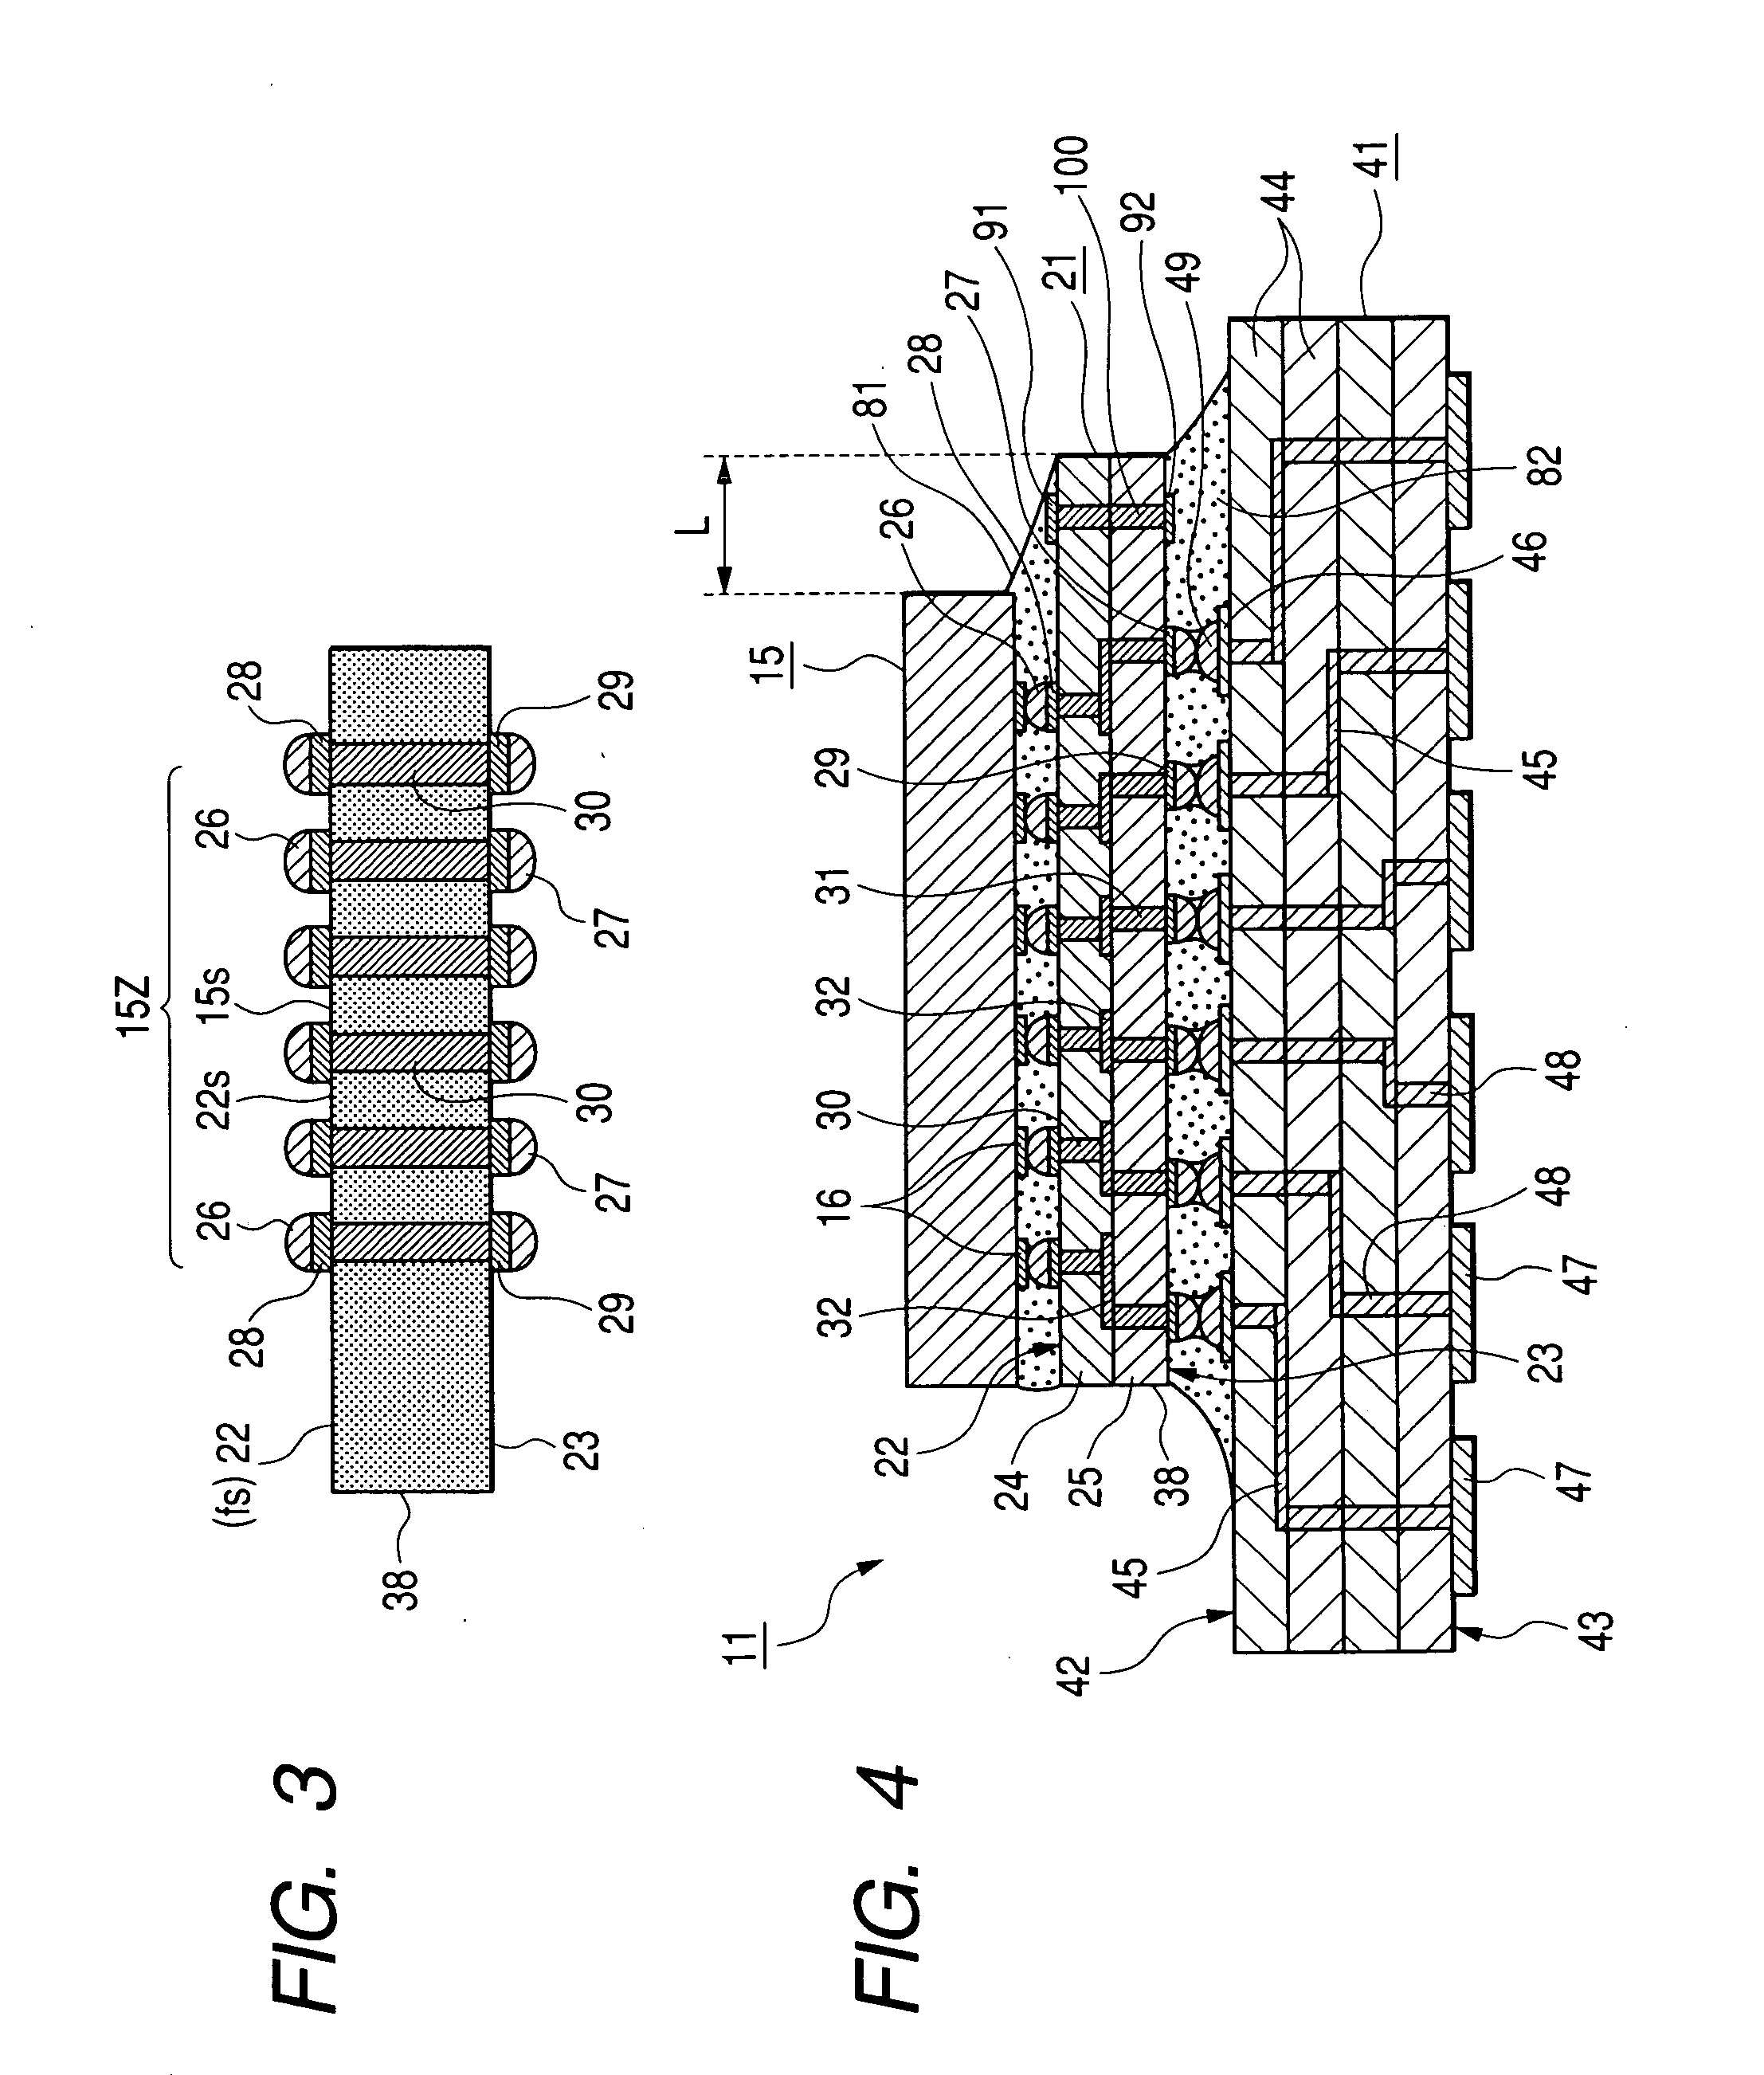 Intermediate substrate, intermediate substrate with semiconductor element, substrate with intermediate substrate, and structure having semiconductor element, intermediate substrate and substrate